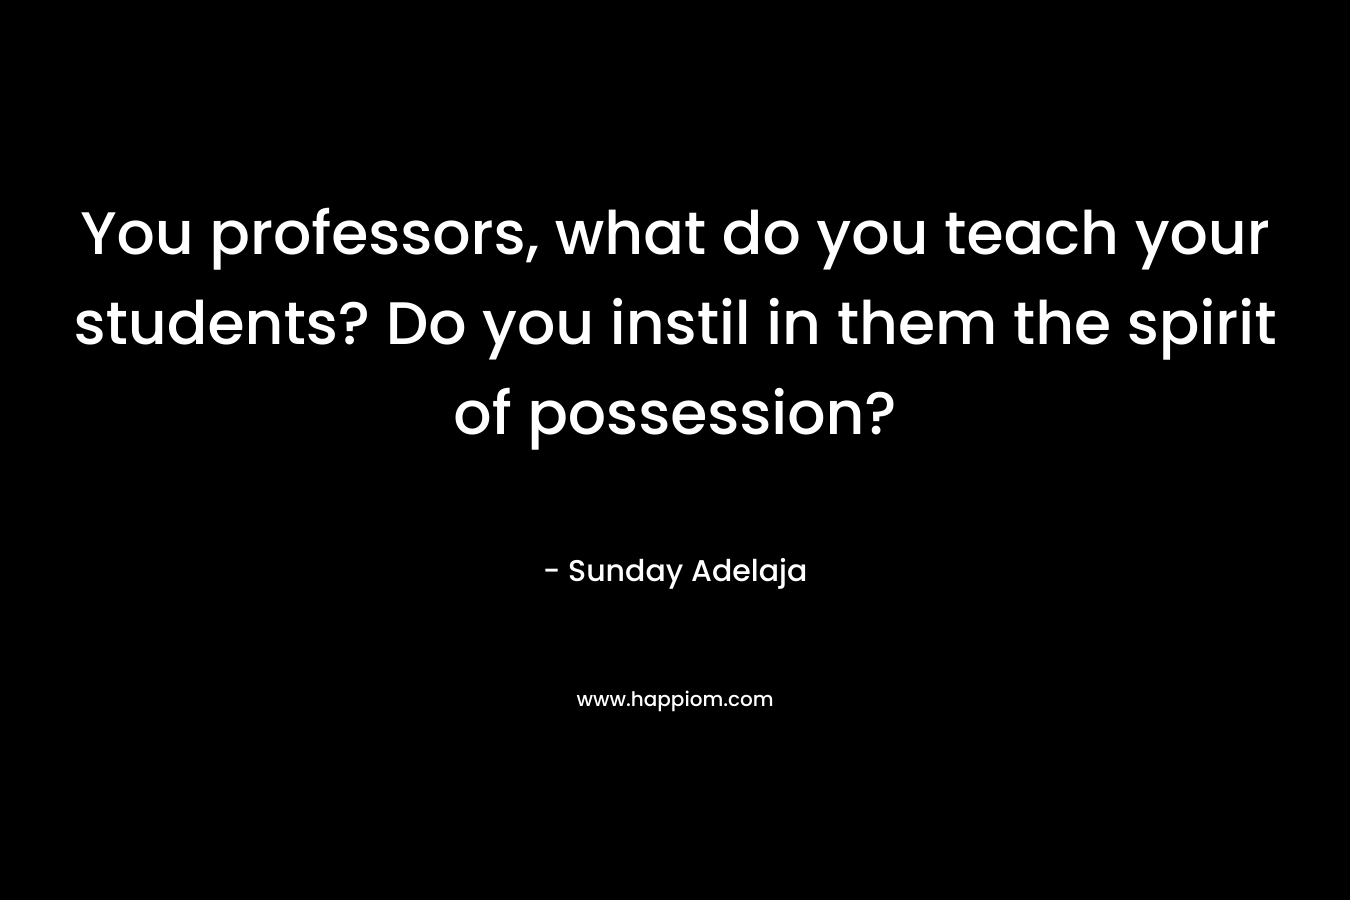 You professors, what do you teach your students? Do you instil in them the spirit of possession?